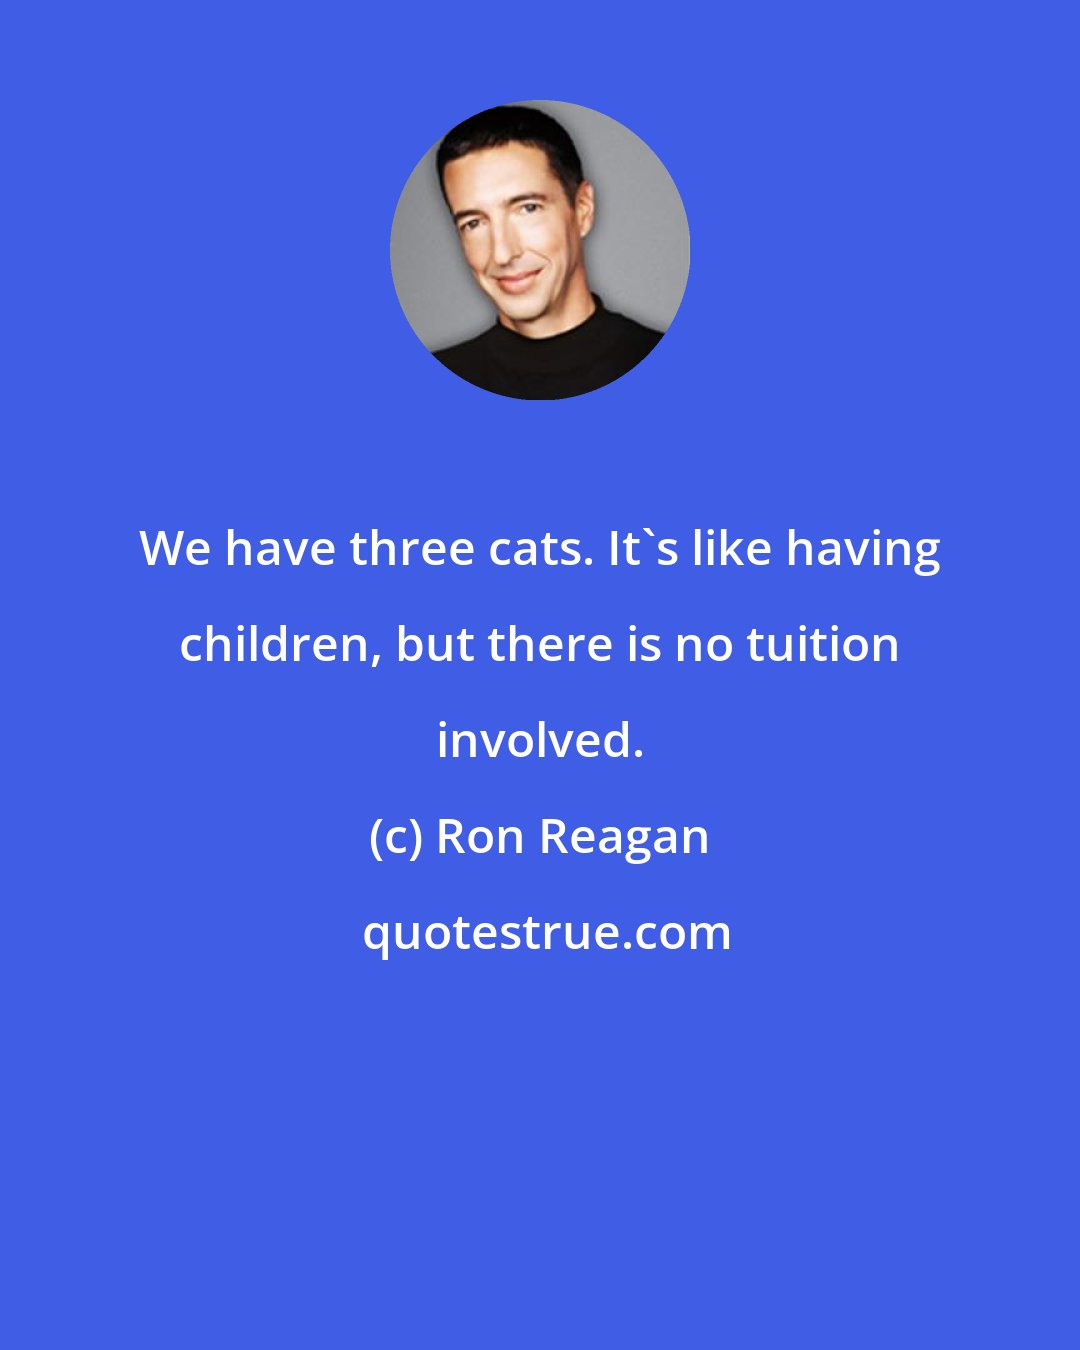 Ron Reagan: We have three cats. It's like having children, but there is no tuition involved.